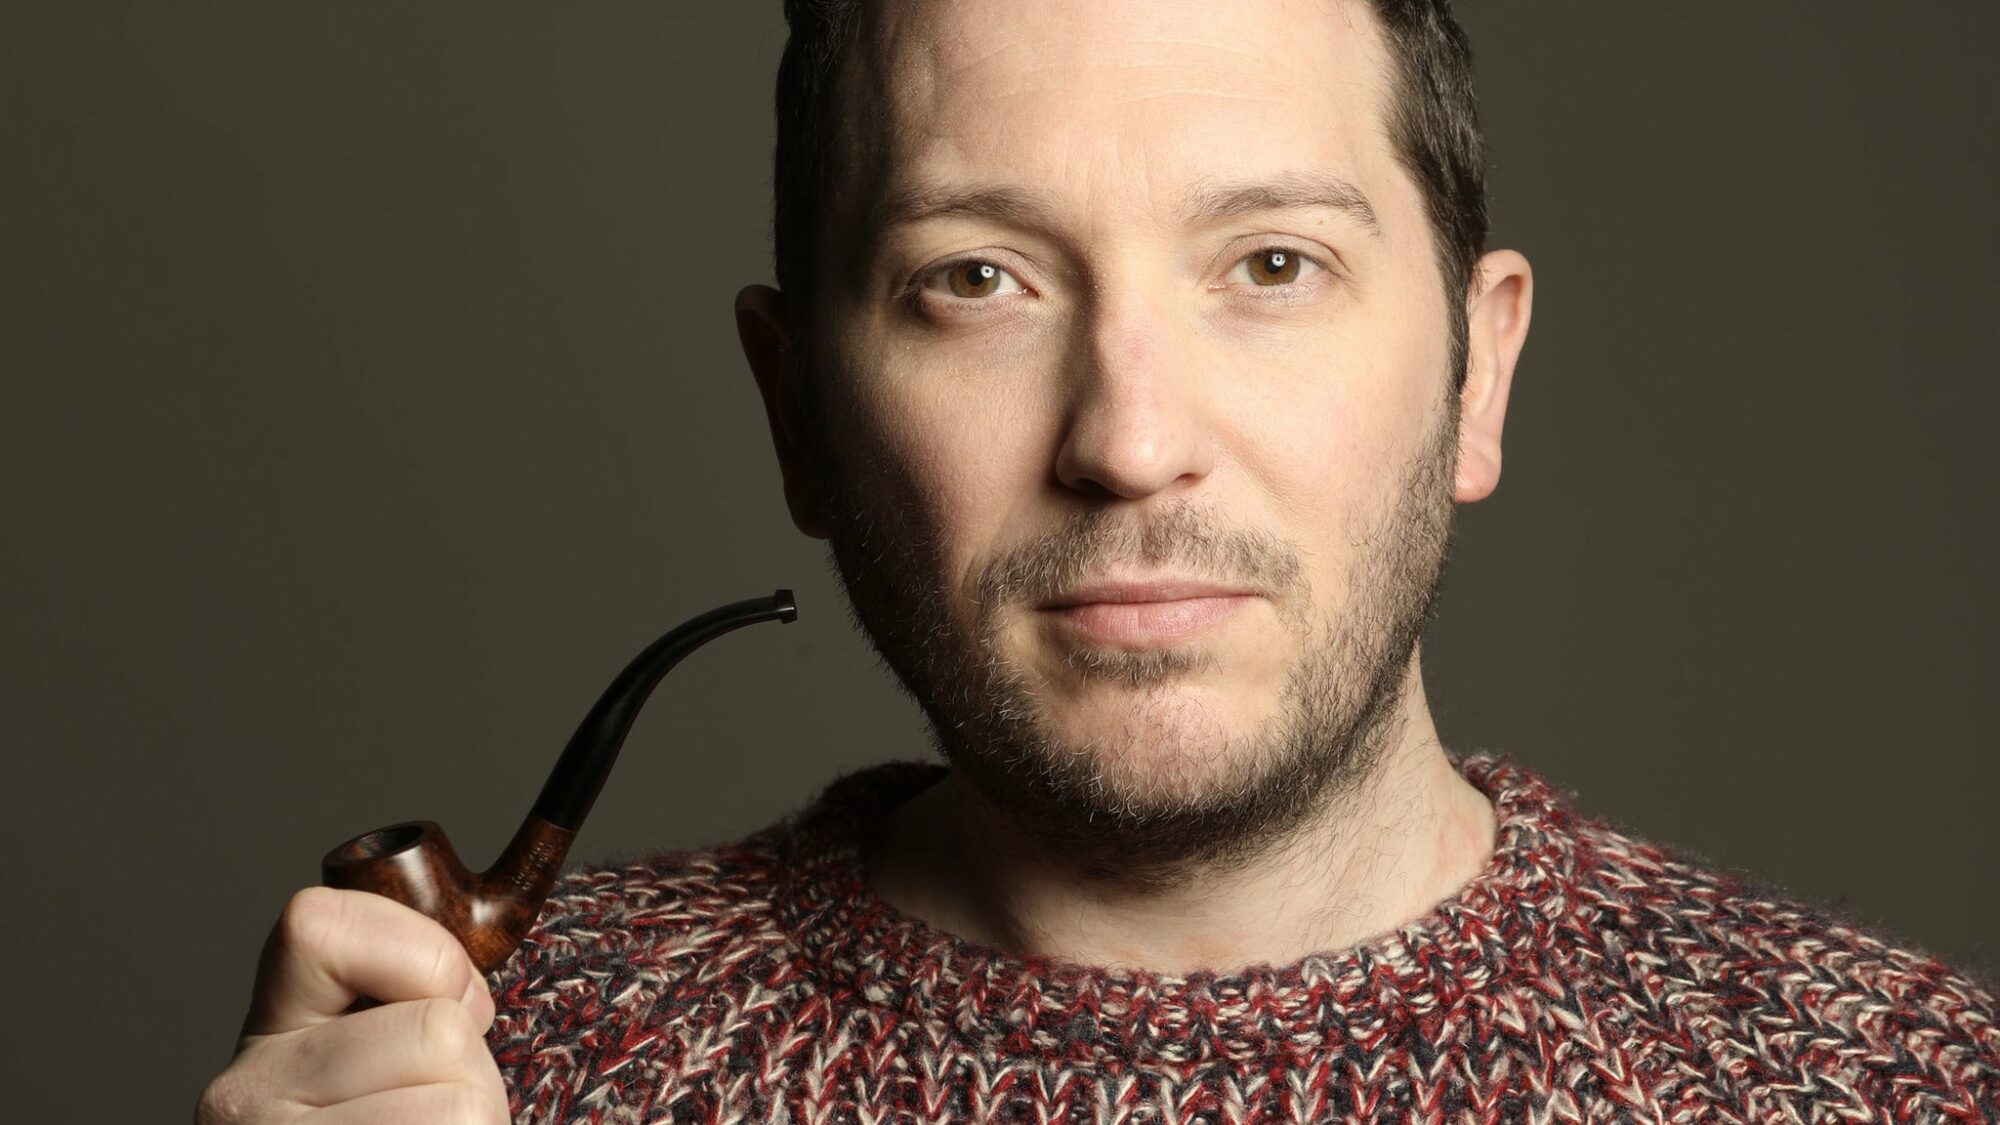 Image name Jon Richardson The Knitwit at Leeds Grand Theatre Leeds the 8 image from the post Jon Richardson: The Knitwit at St Georges Hall, Bradford, Bradford in Yorkshire.com.